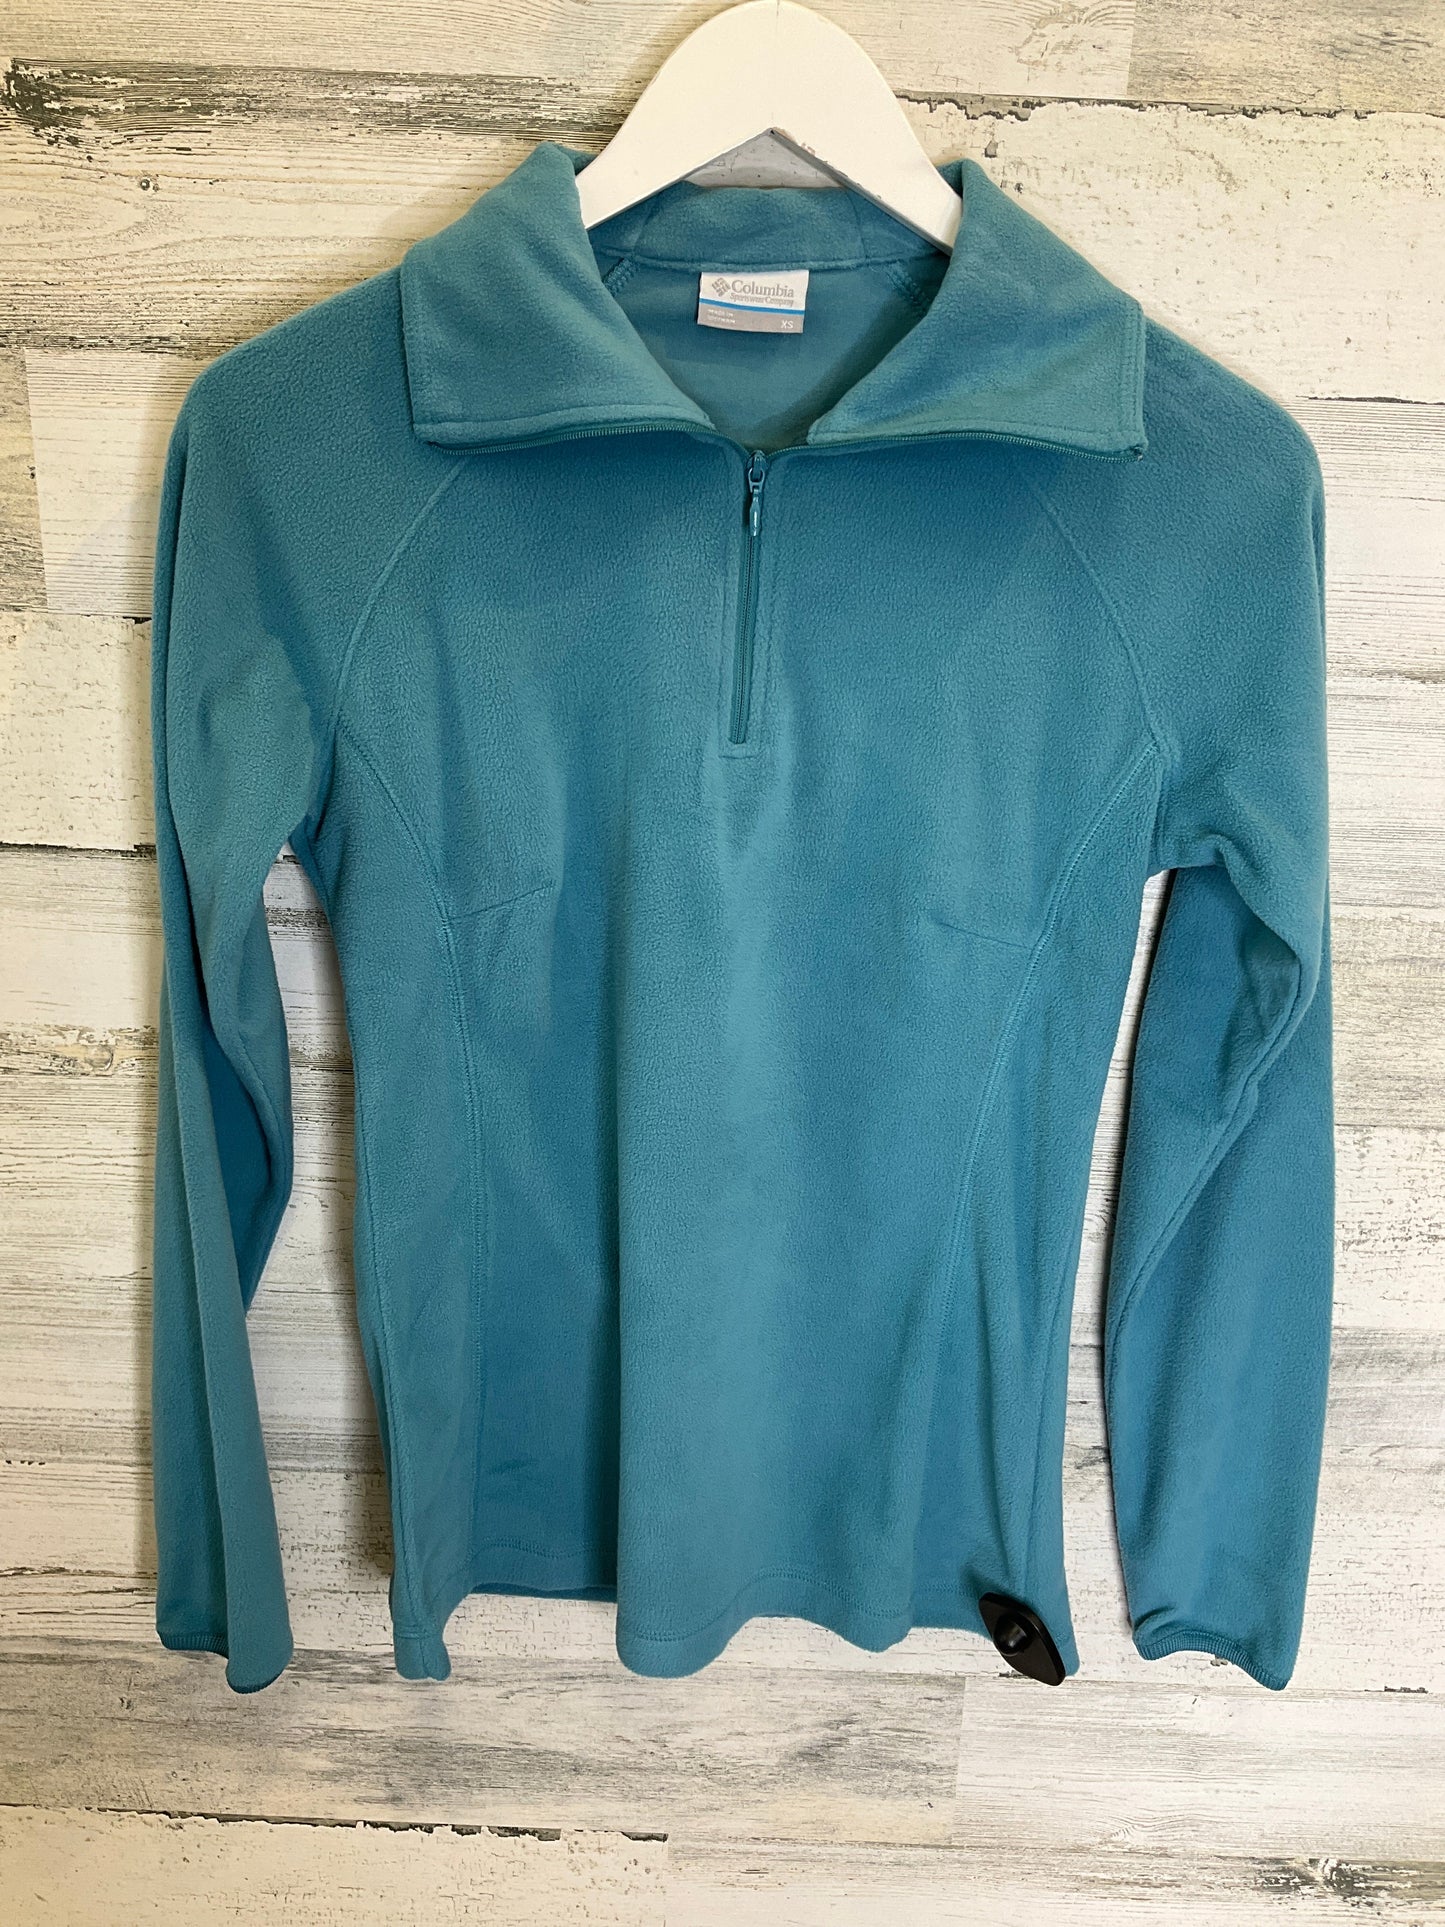 Teal Athletic Top Long Sleeve Collar Columbia, Size Xs